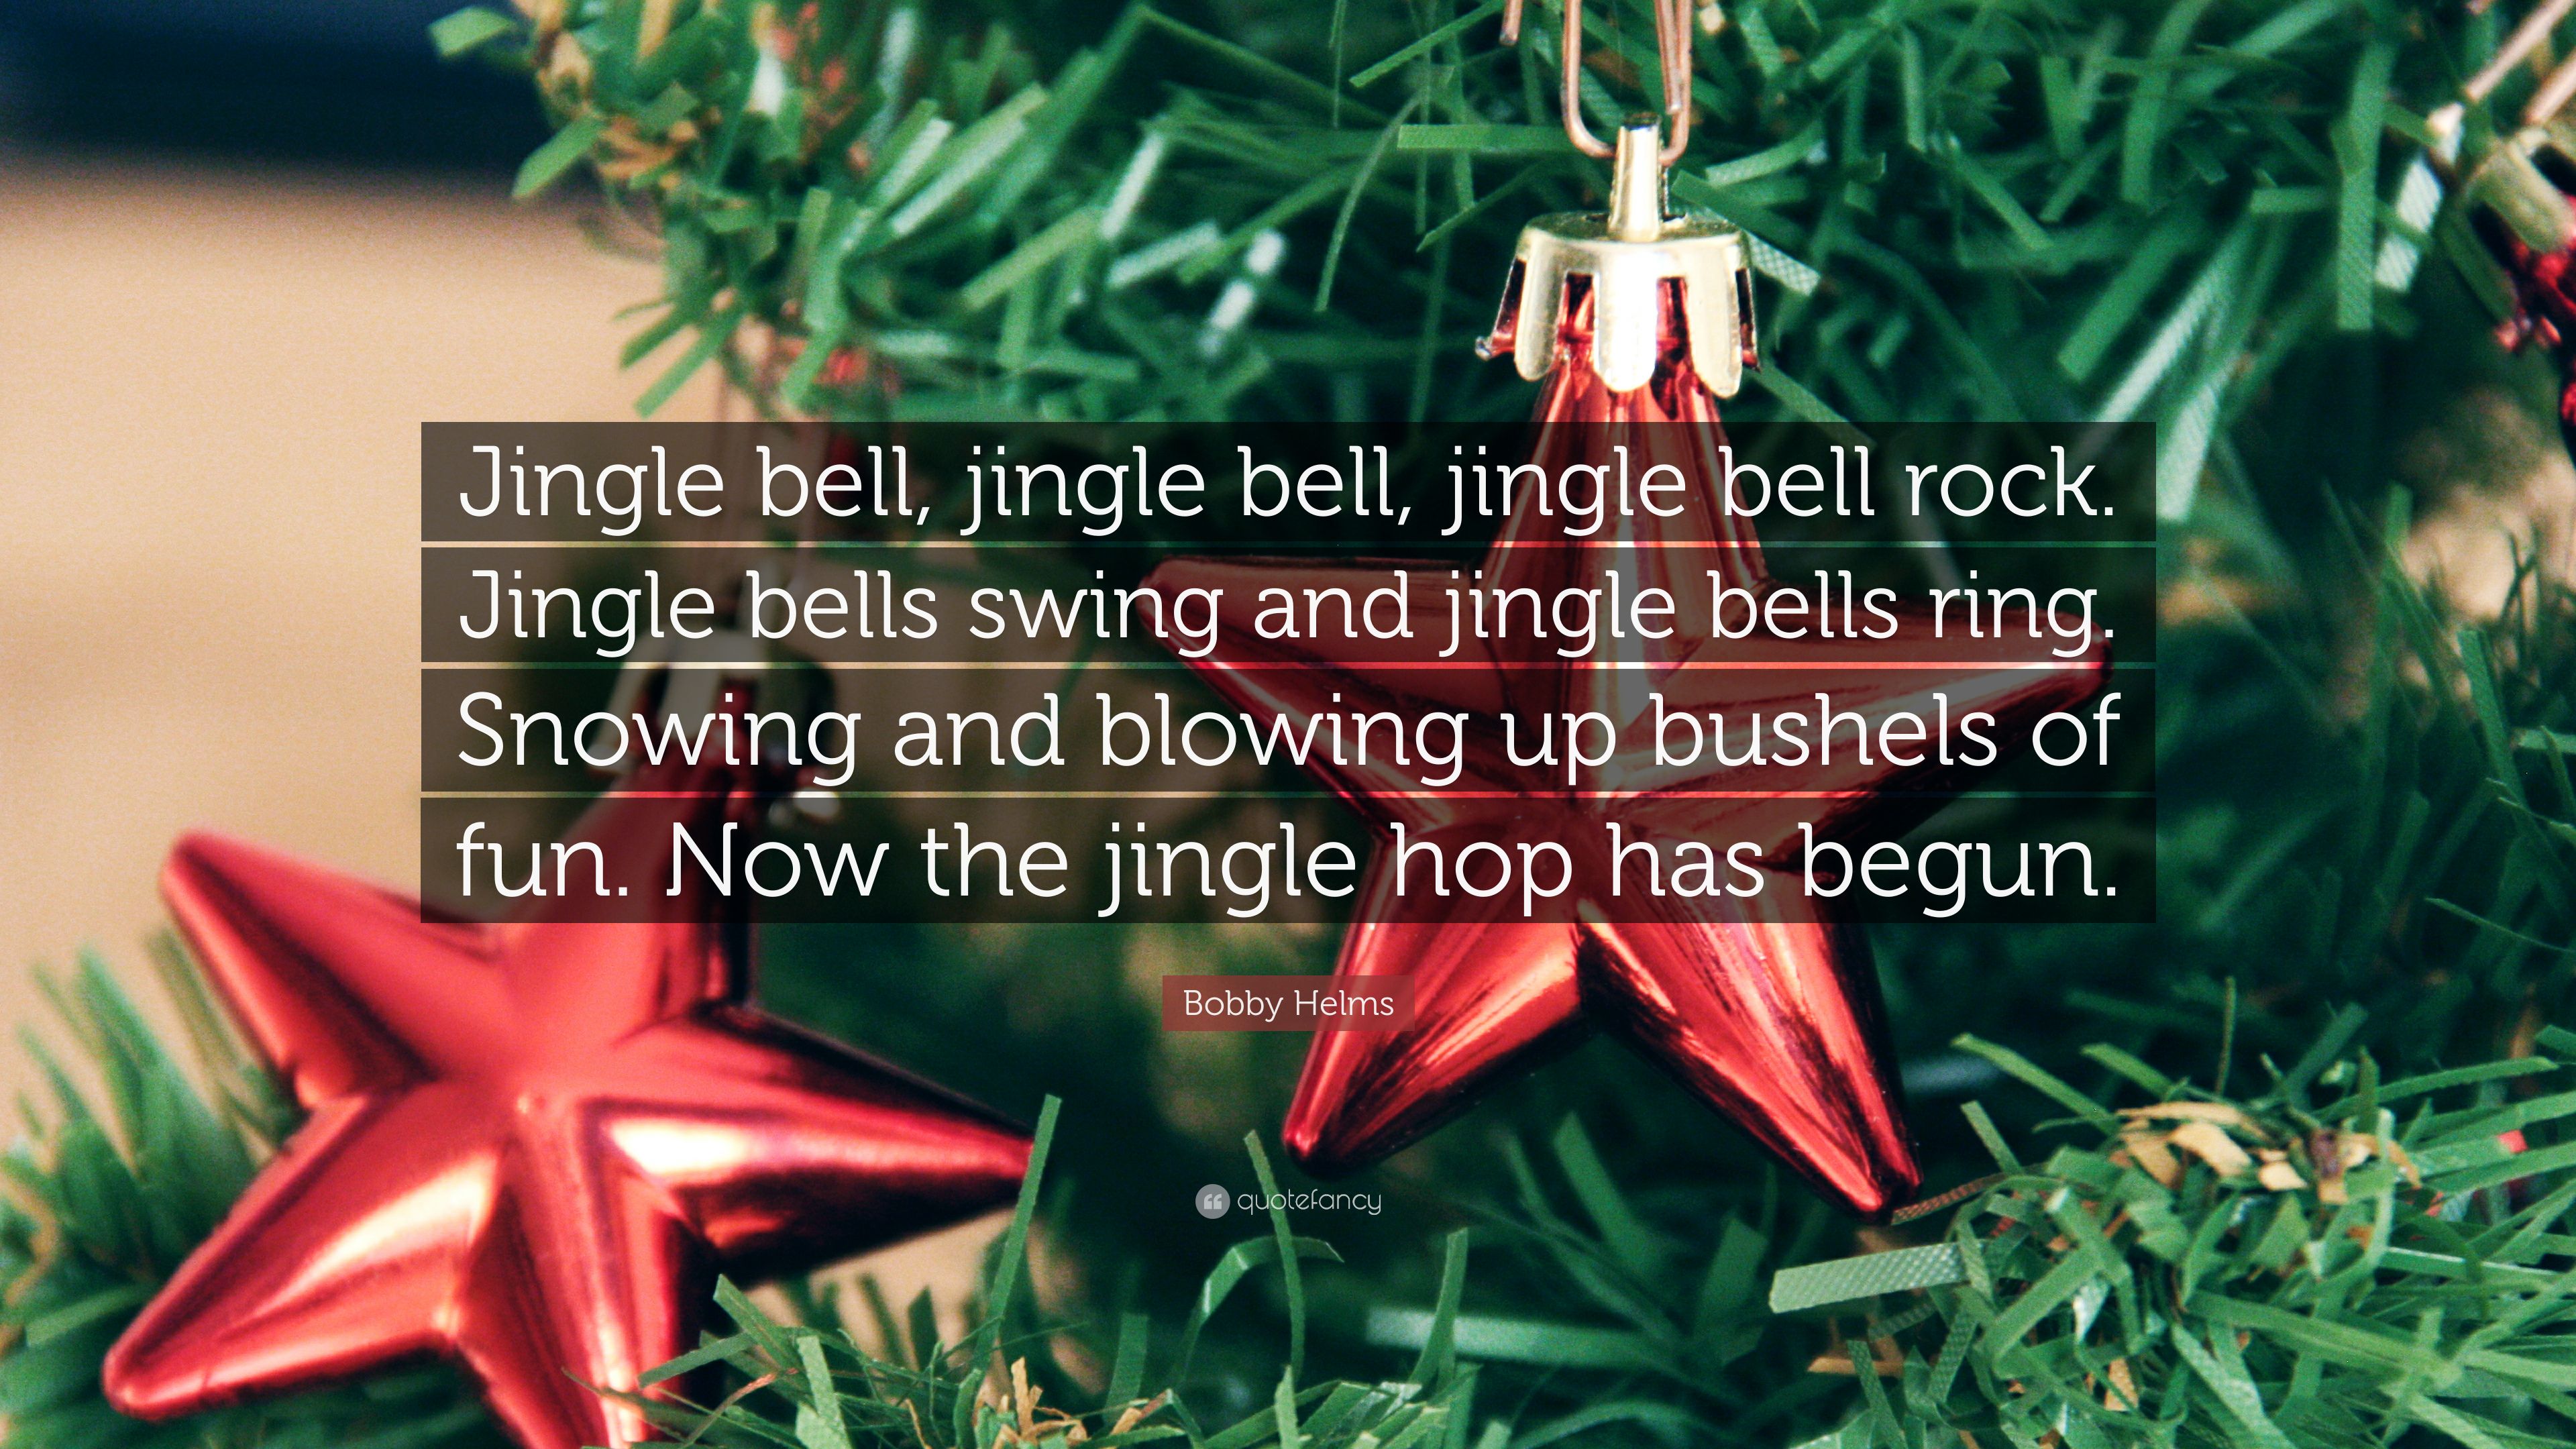 Bobby Helms Quote: “Jingle bell, jingle bell, jingle bell rock. Jingle bells swing and jingle bells ring. Snowing and blowing up bushels” (7 wallpaper)